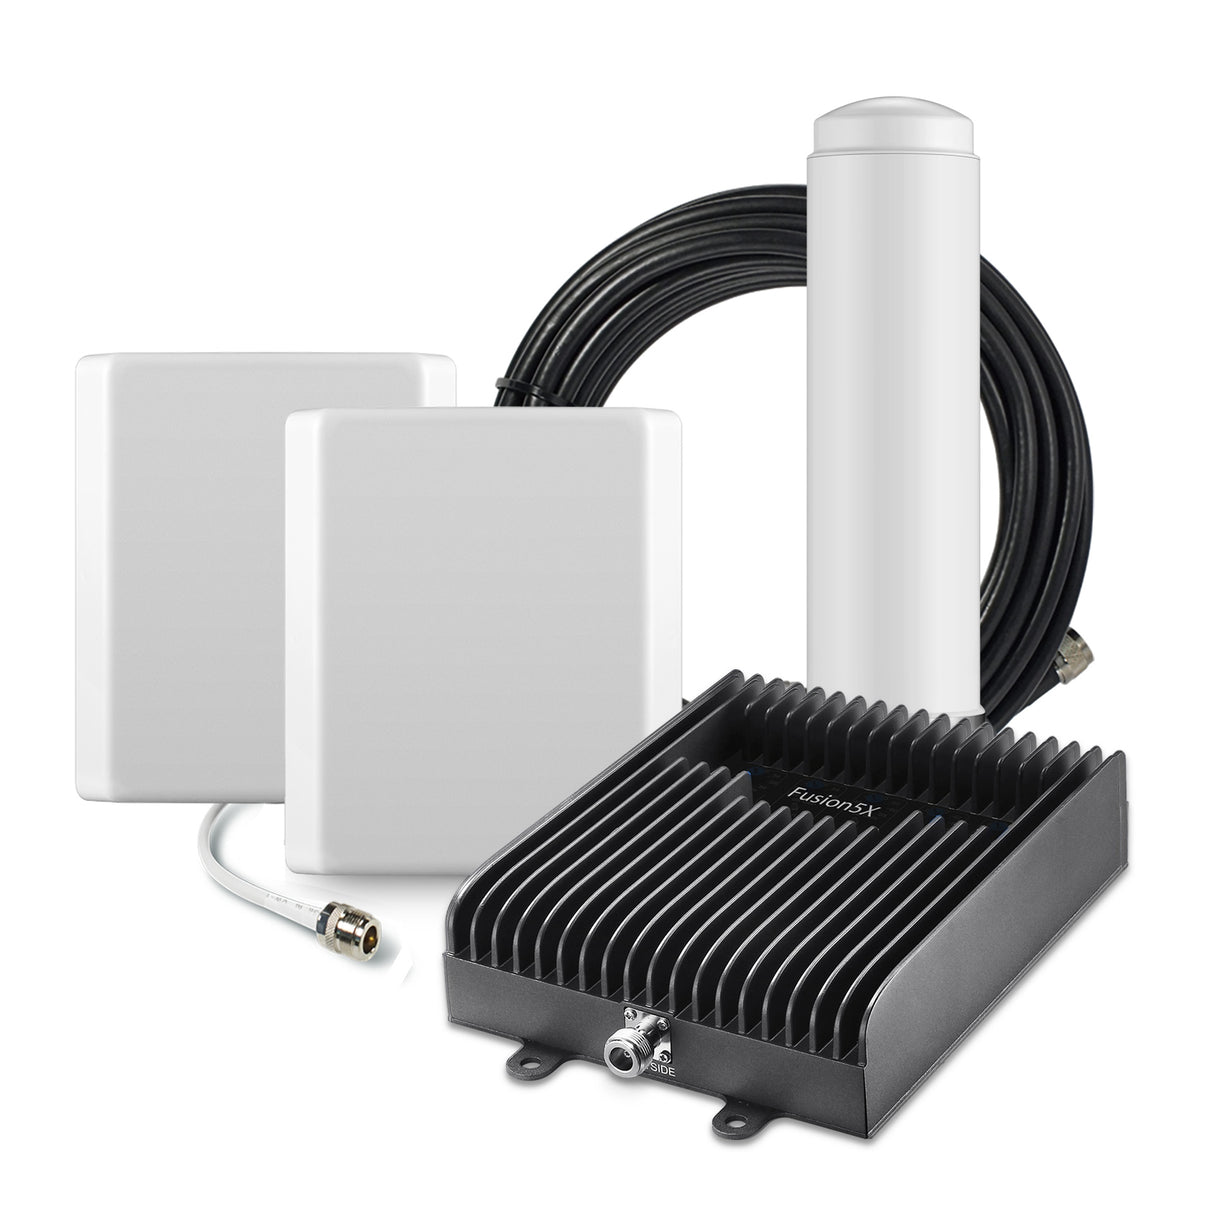 SureCall Fusion5X 72dB Signal Booster Kit - Voice, 3G & 4G LTE - Omni and 2 Panel Kit